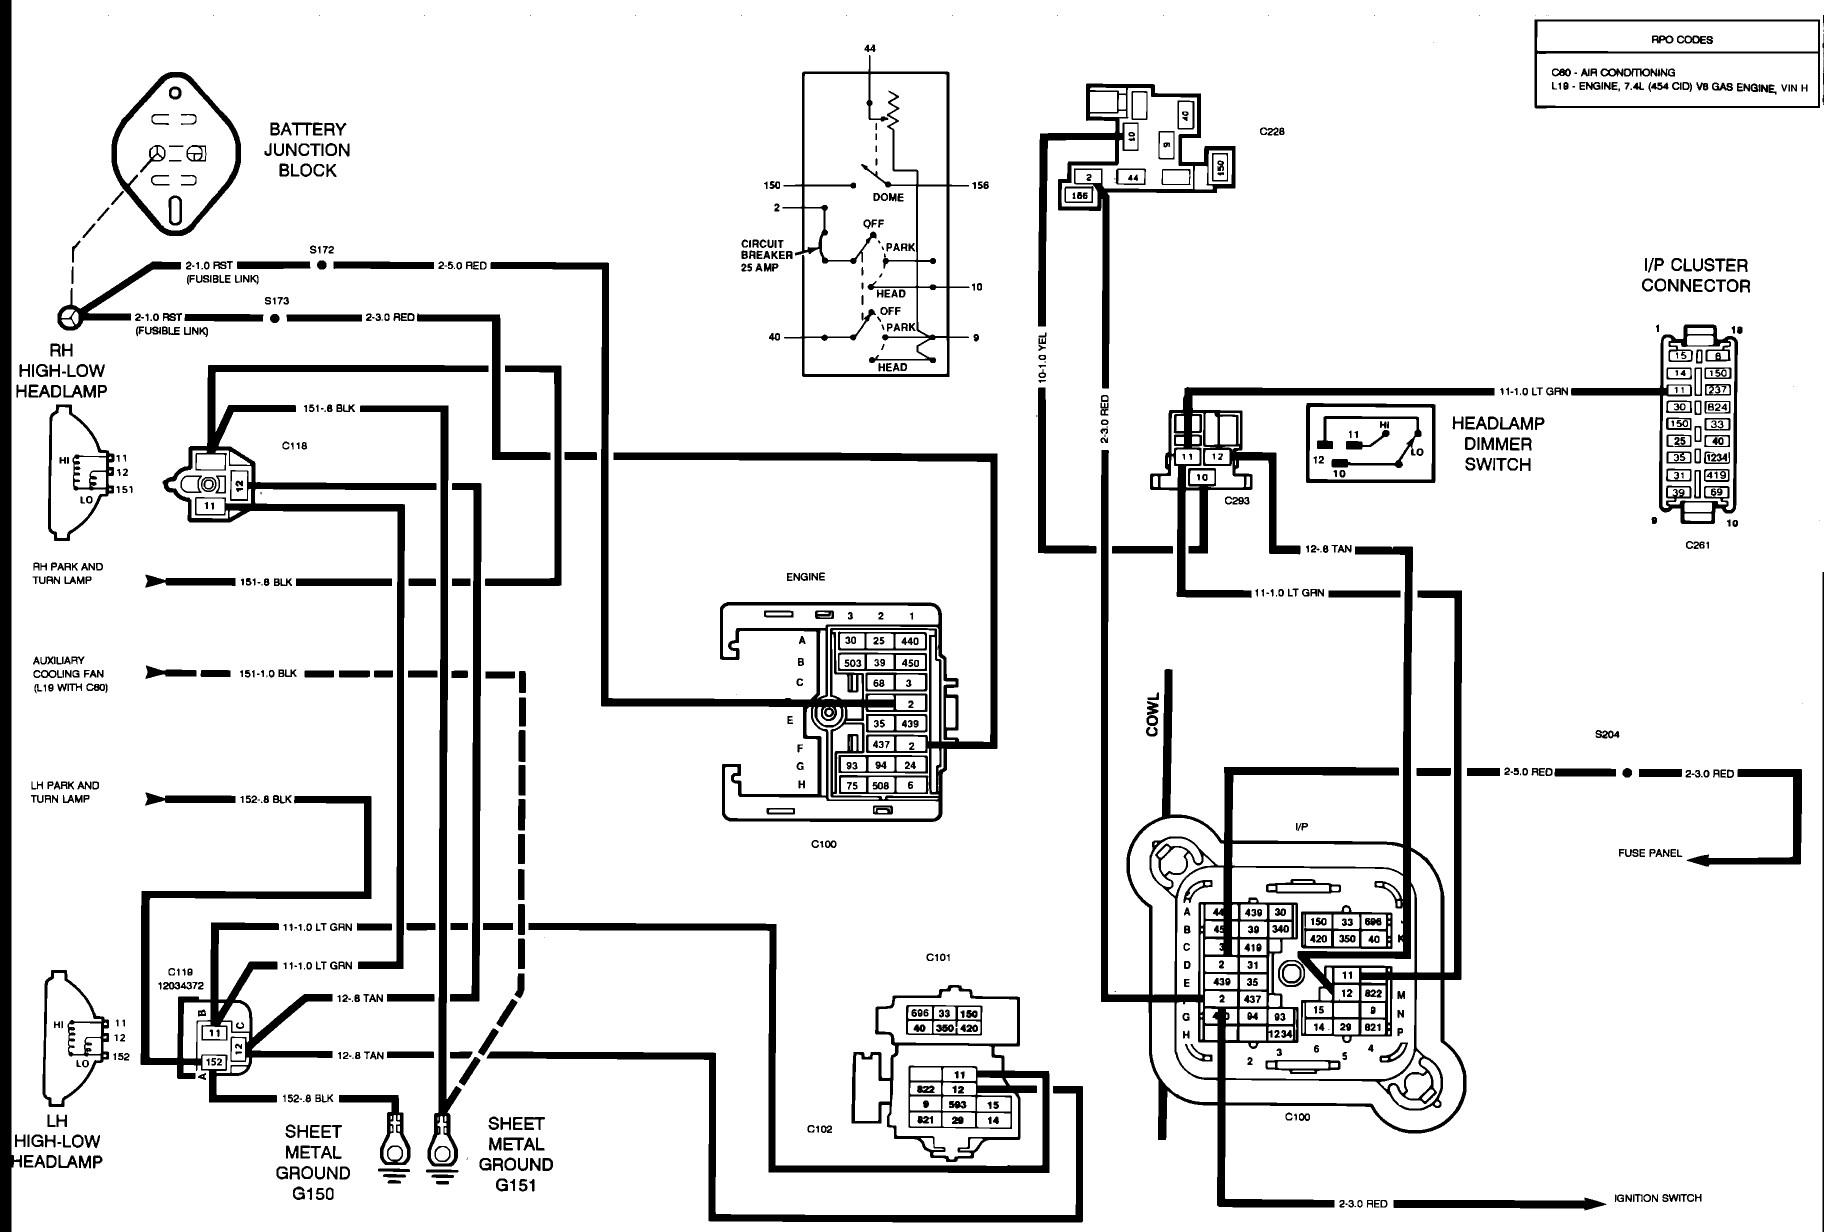 1986 Chevy Truck Fuse Box Diagram Junction Box Wiring Diagram Of 1986 Chevy Truck Fuse Box Diagram